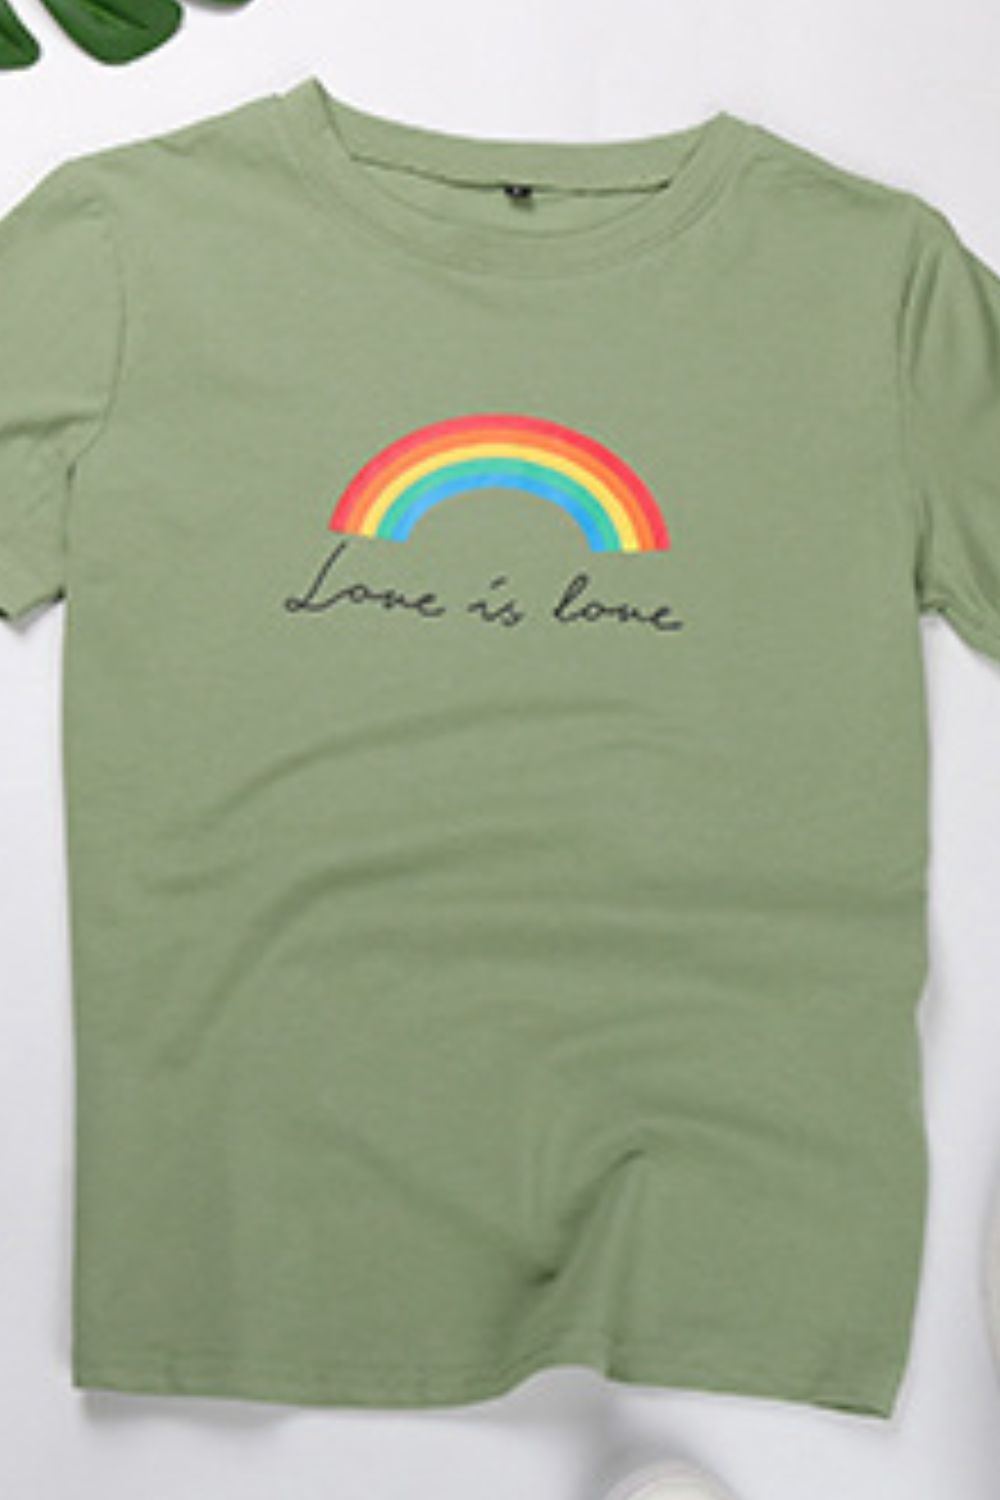 Love is Love - Wear Your Heart on Your Sleeve and Spread Positivity Everywhere You Go! - Guy Christopher